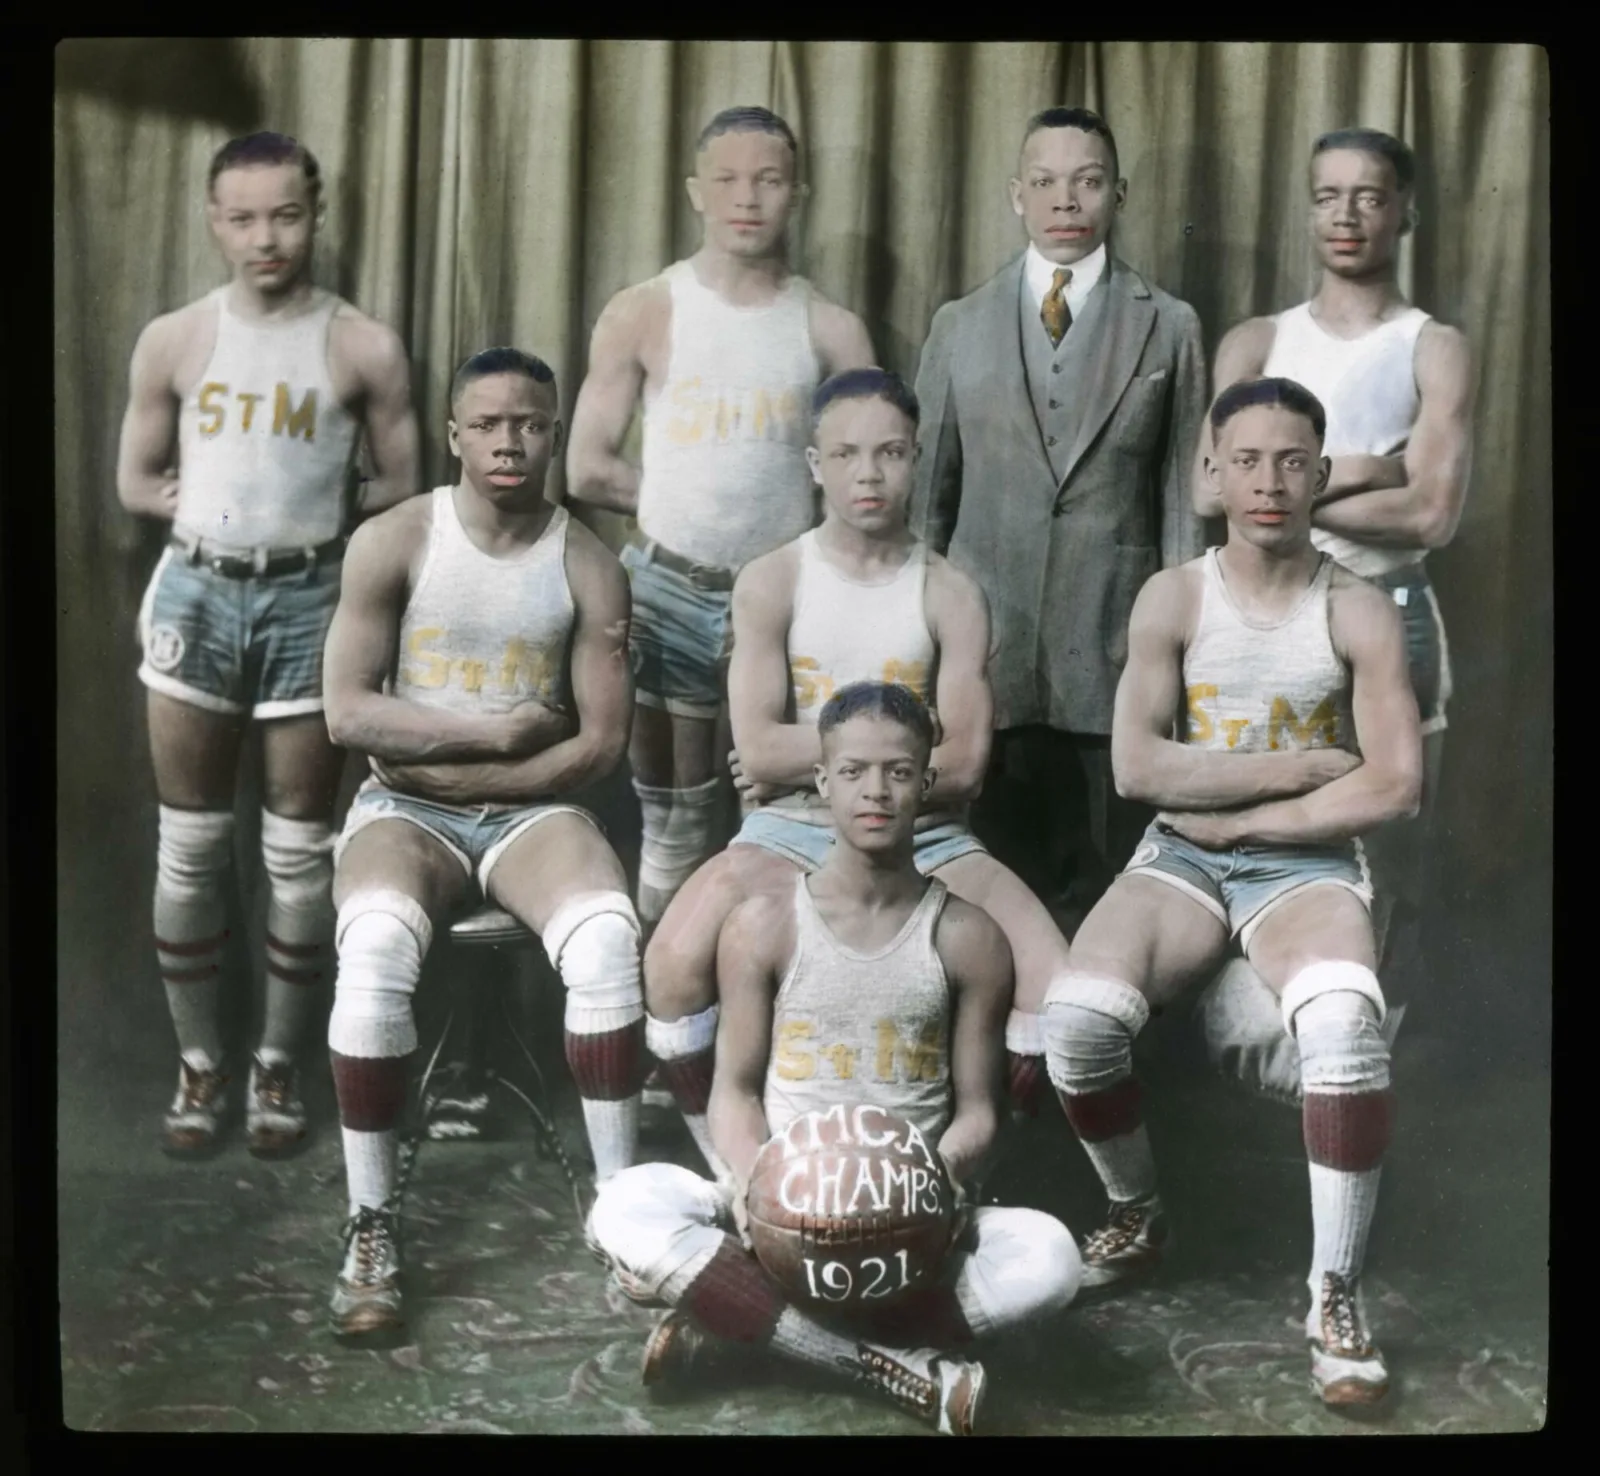 Youth basketball players sit or stand in three rows. They are wearing tank tops, shorts, long socks, and knee pads. The player sitting in the middle holds a basketball. On the basketball are the words “YMCA Champs 1921.”